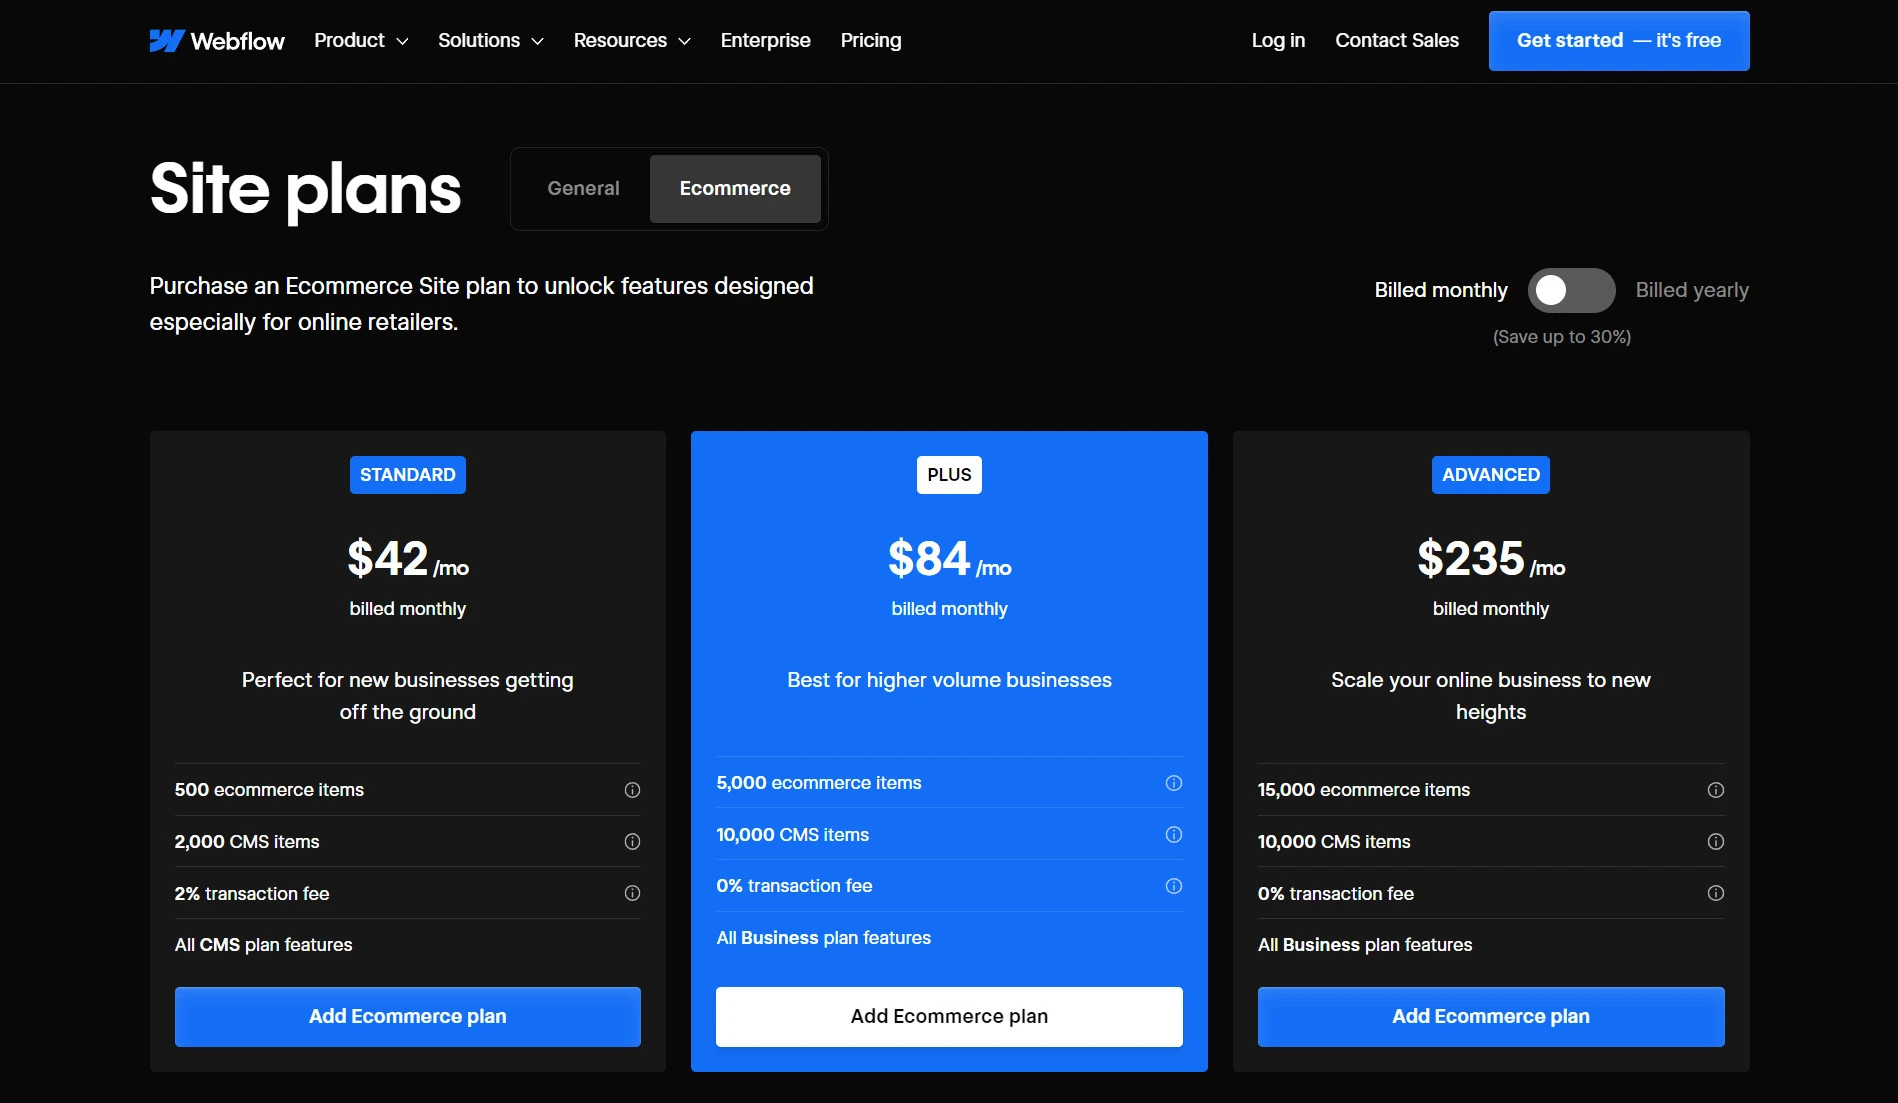 Webflow’s ecommerce pricing 